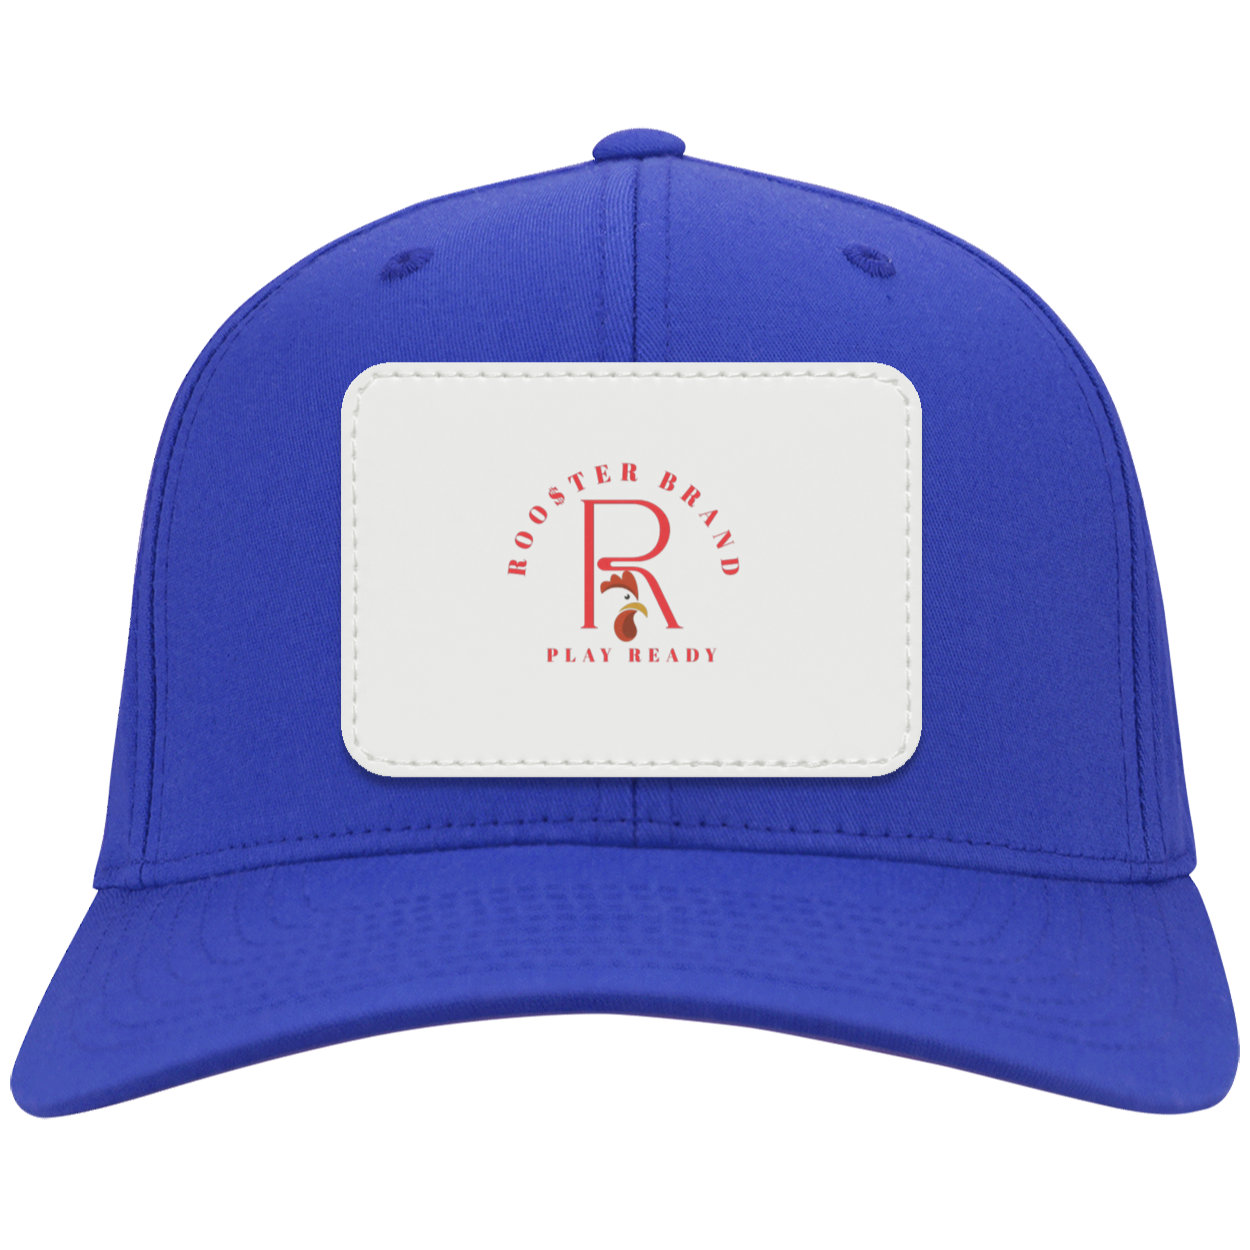 Roo$ter Brand Twill Cap - Patch